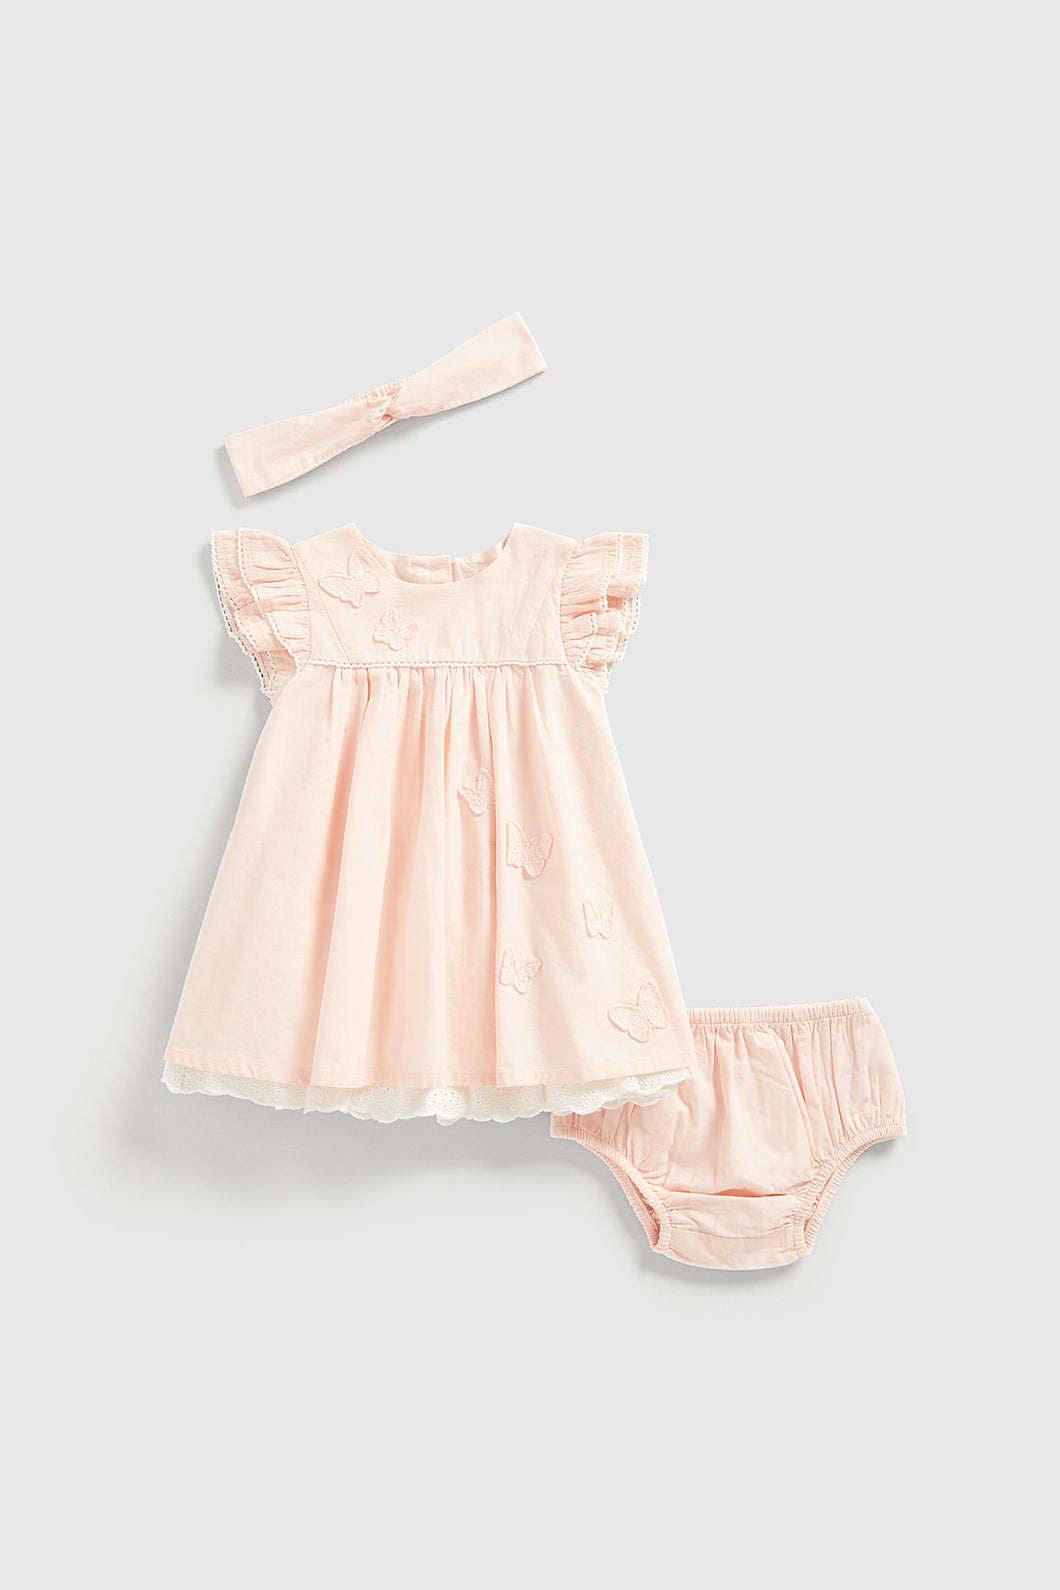 Mothercare Pink Butterfly Dress, Headband and Knickers Set